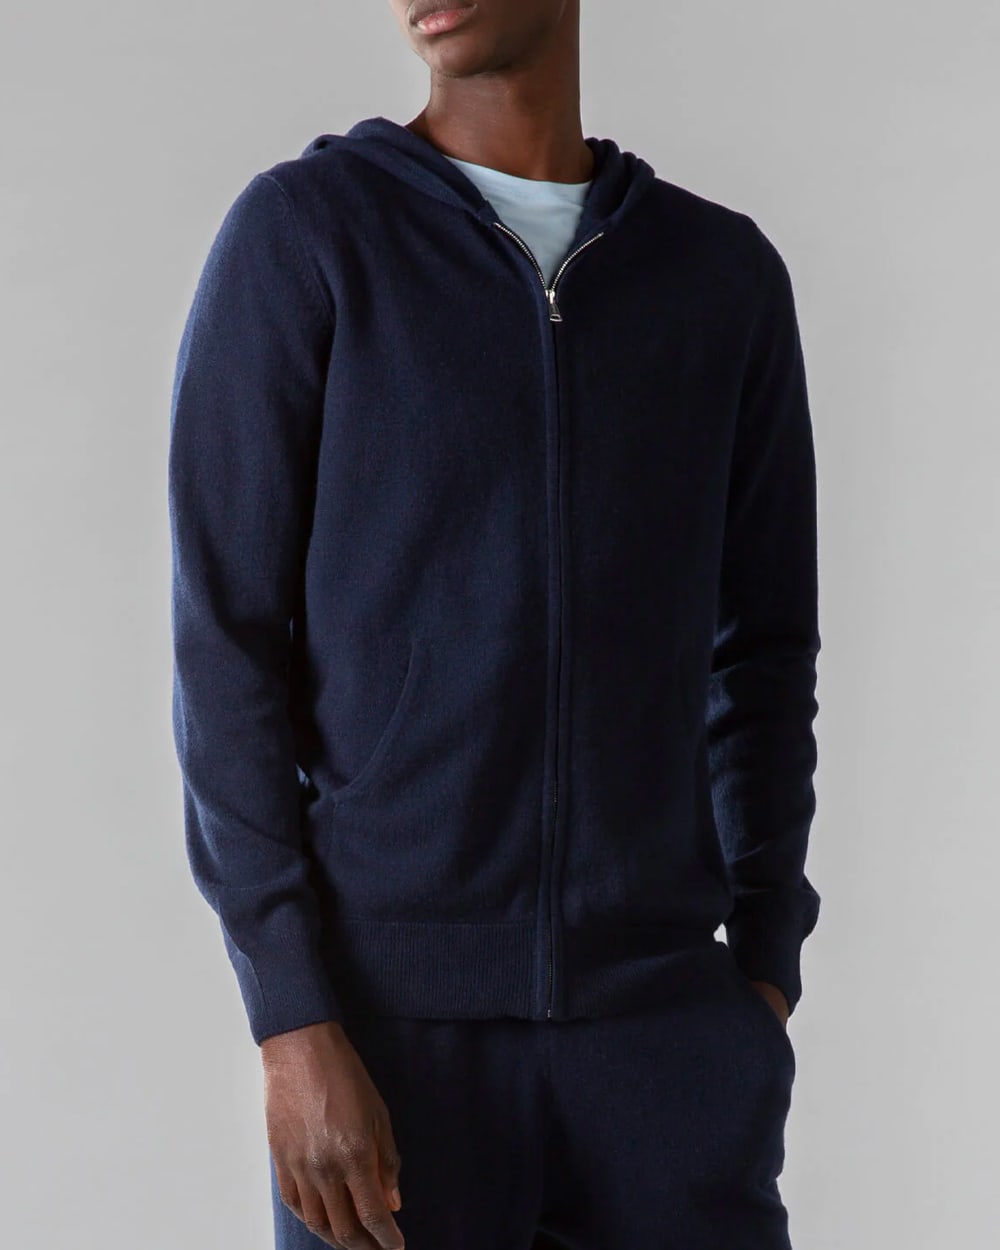 Black man wearing a matching cashmere navy hoodie and sweatpants with a white T-shirt